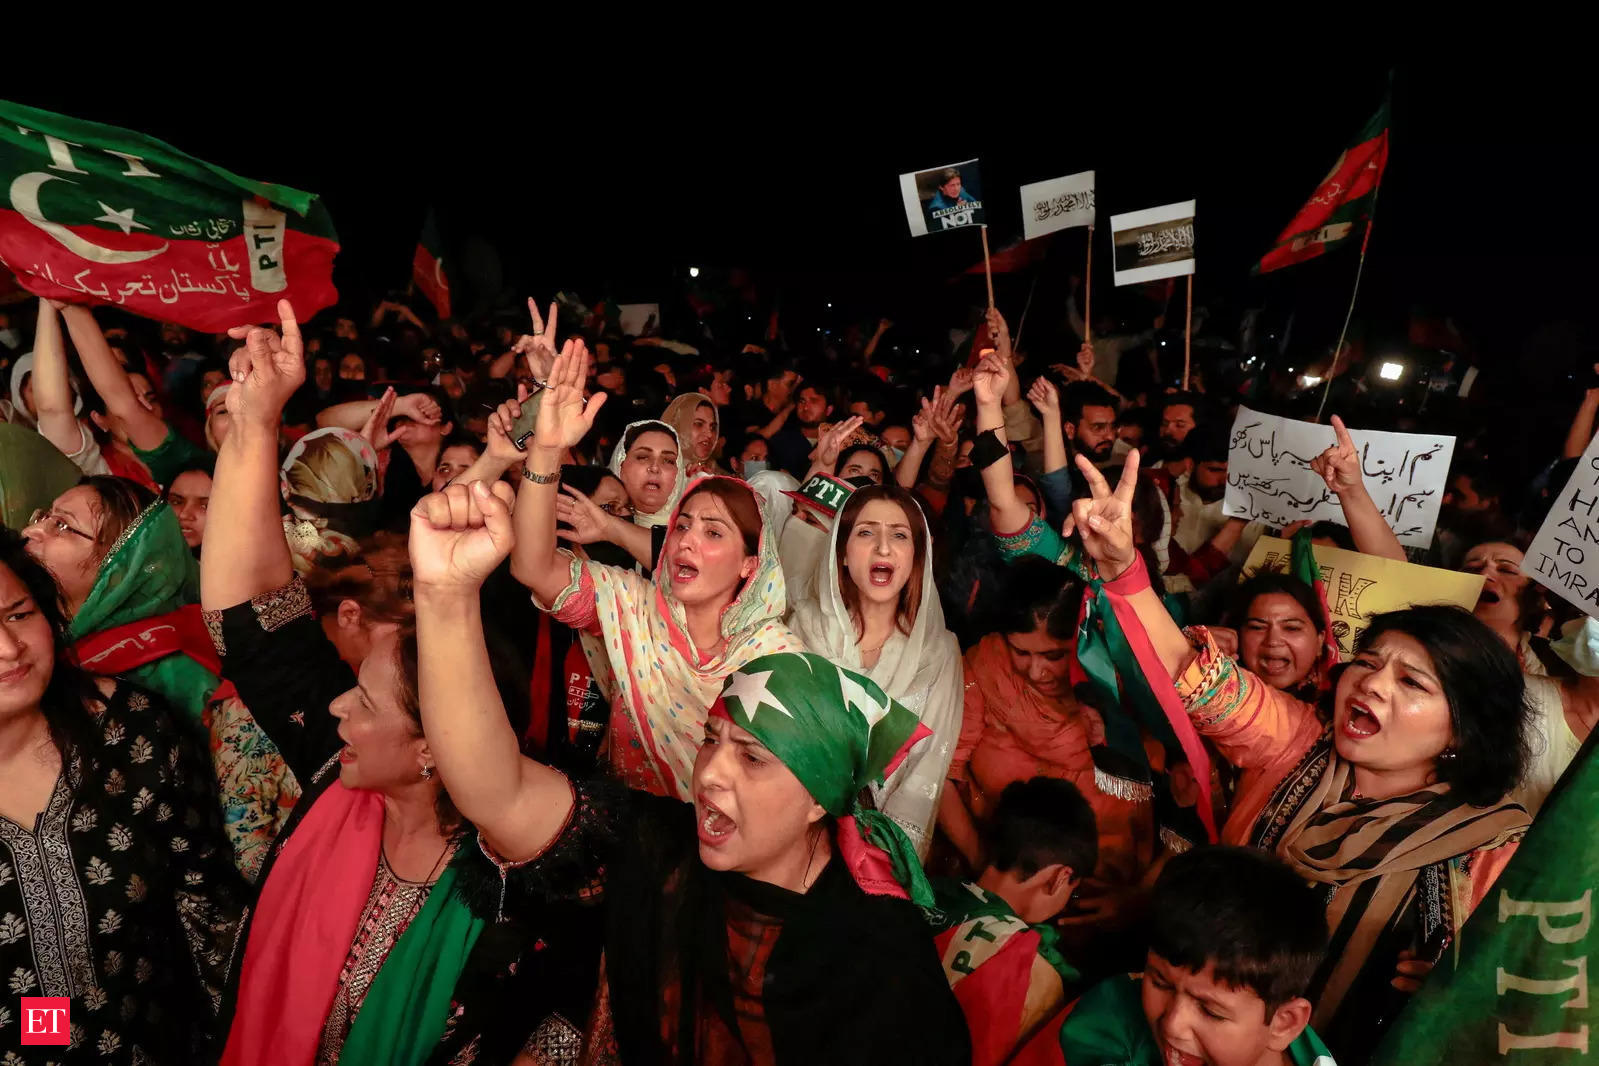 Imran Khan News: Imran Khan thanks Pakistanis for supporting protests against his ouster as PM - The Economic Times